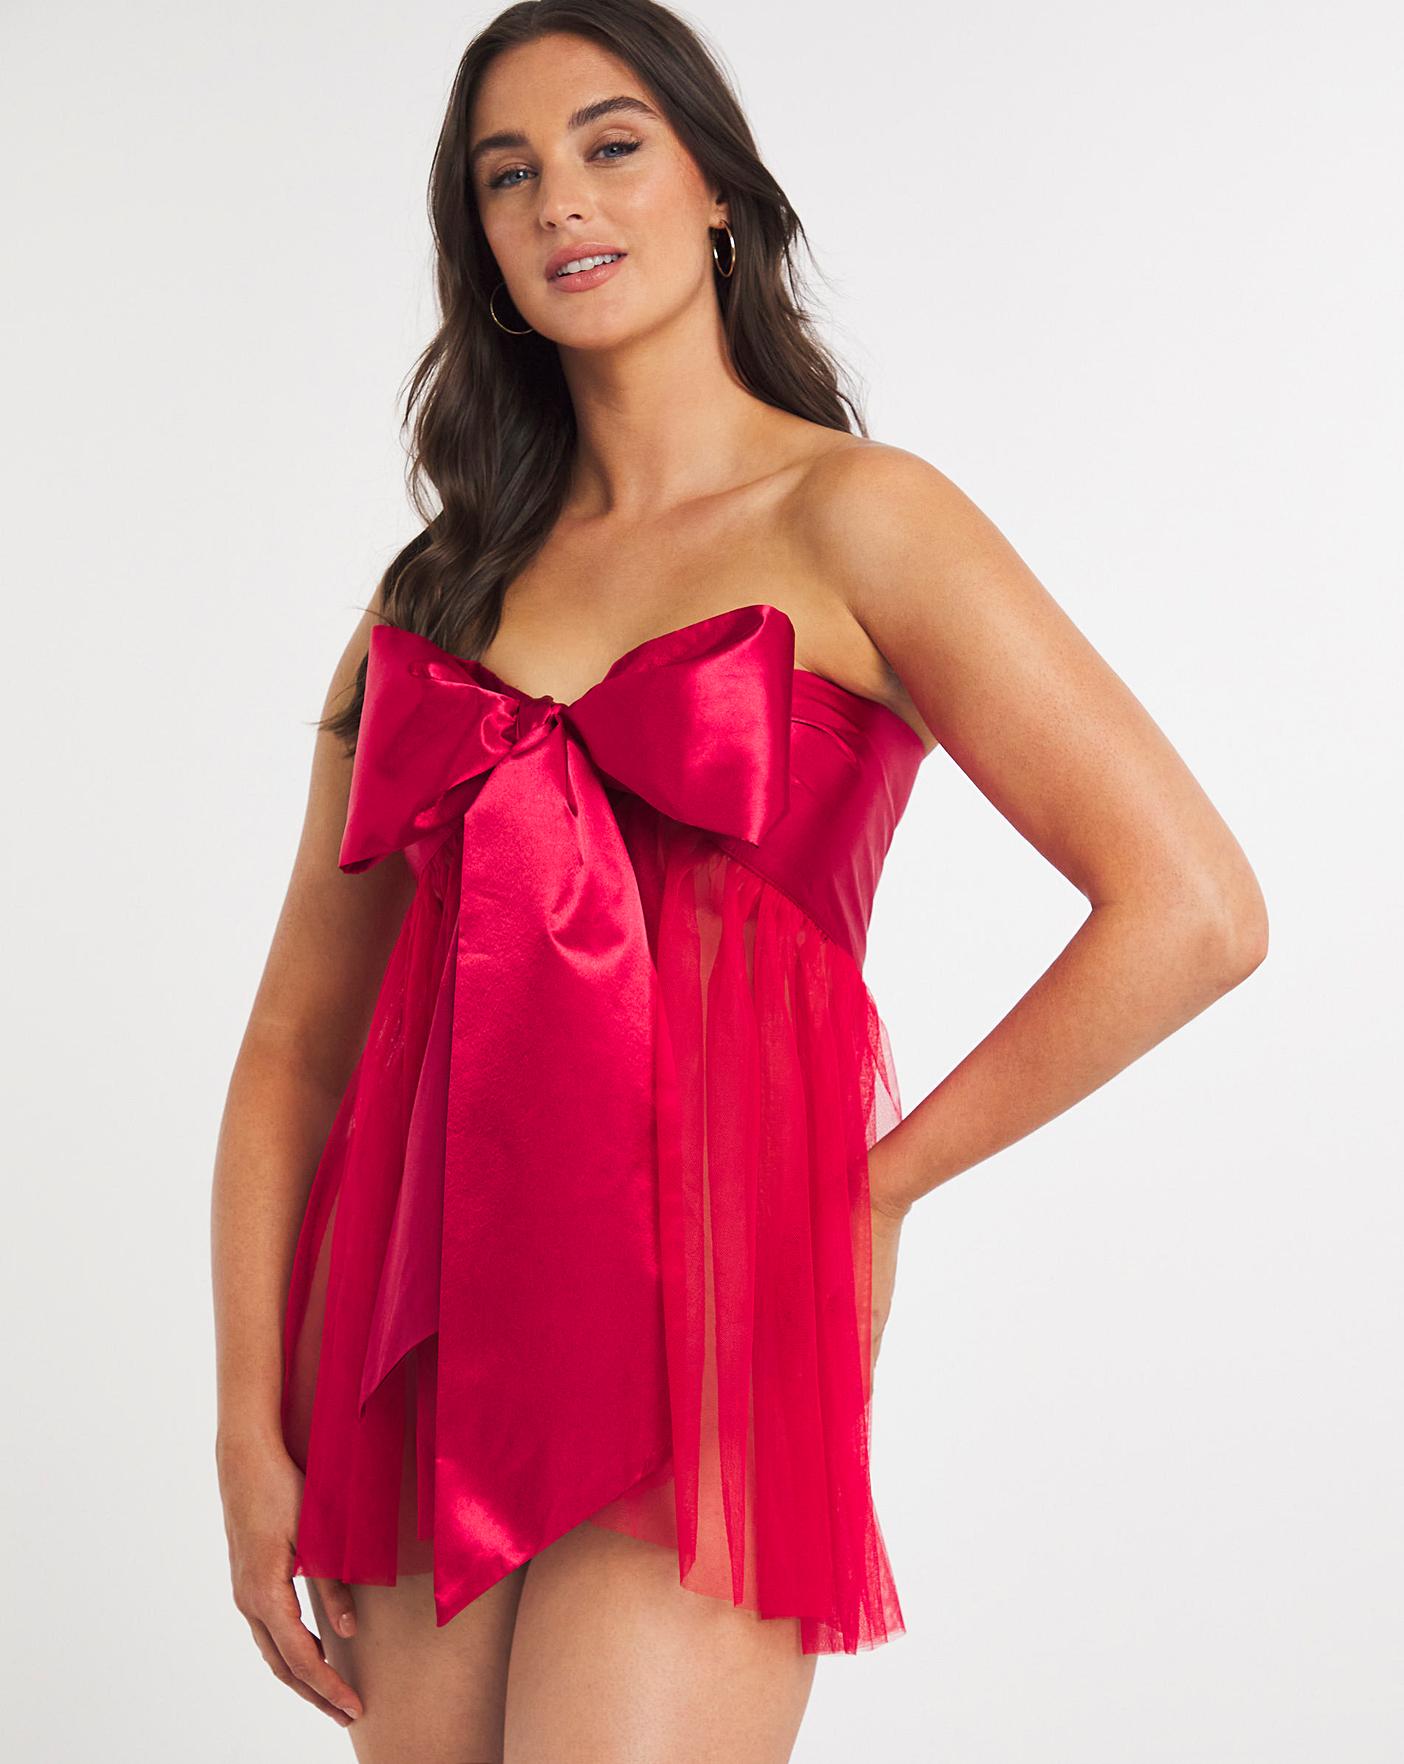 Ann Summers All Wrapped Up Dress ...